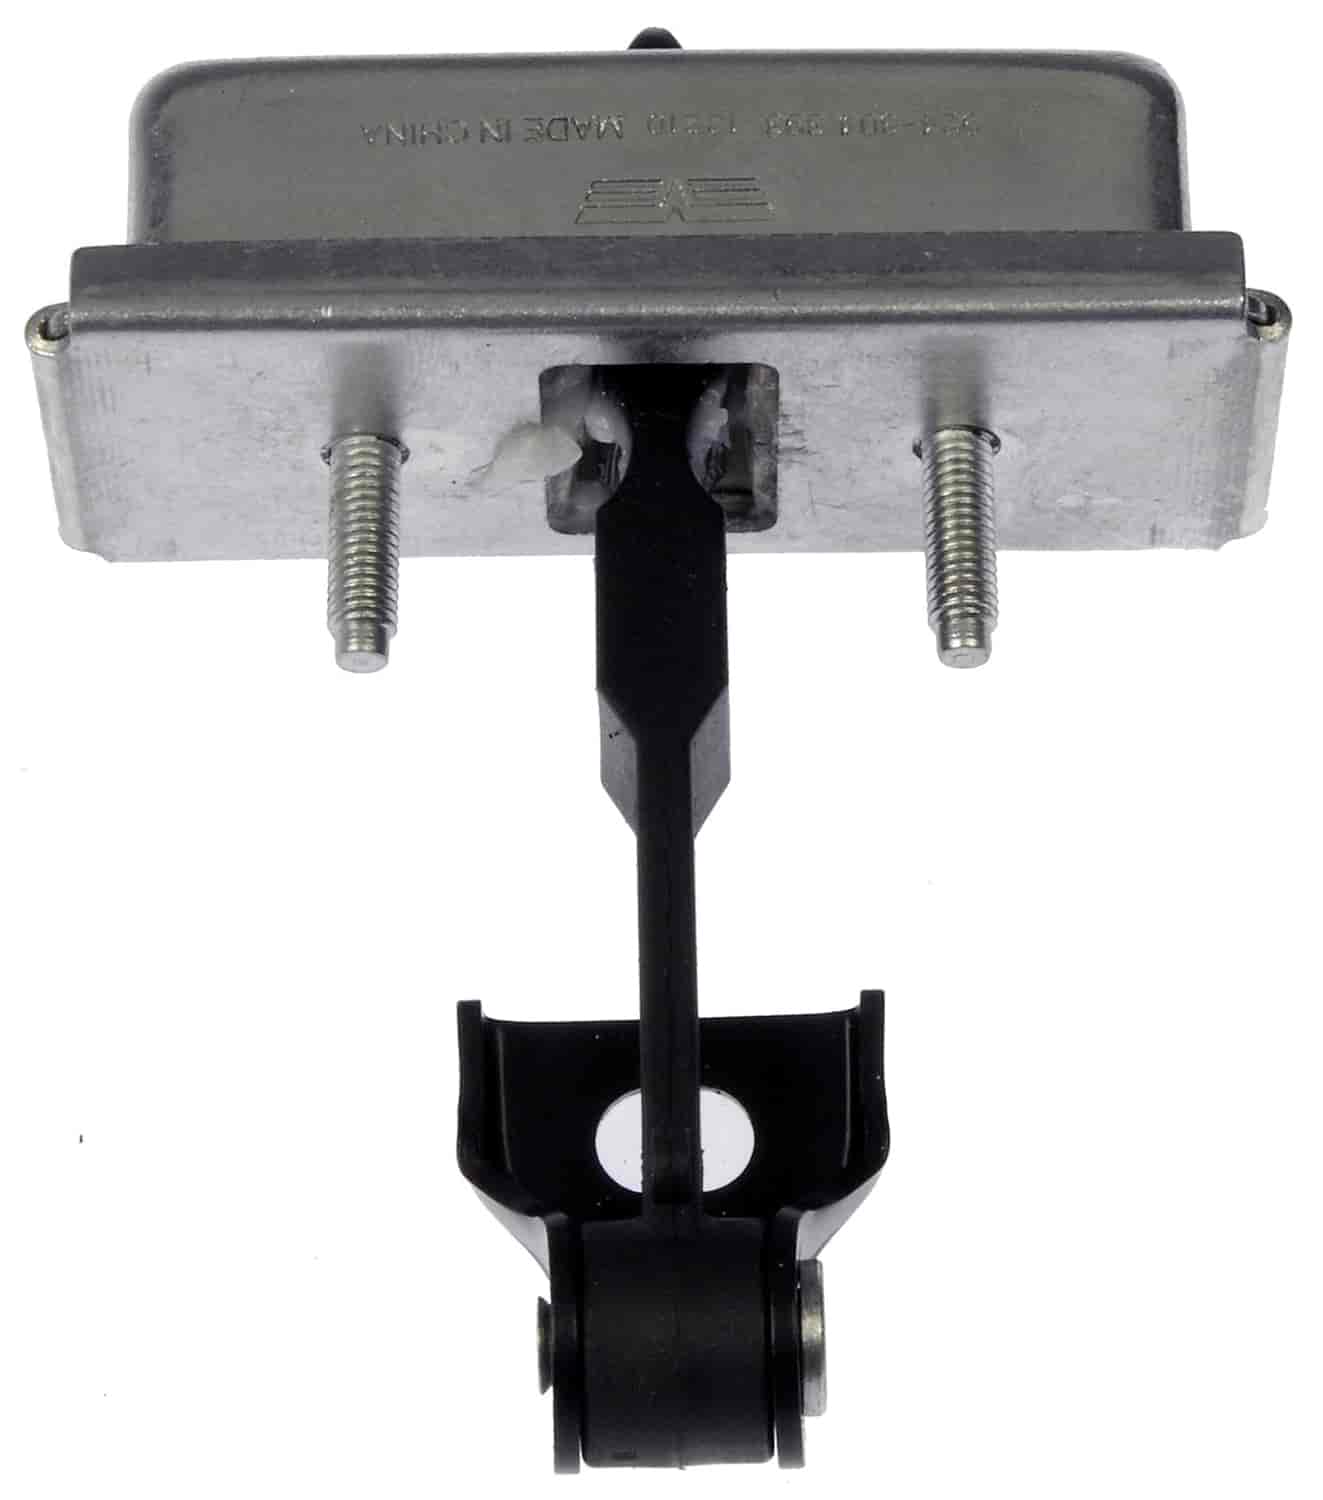 Door Check Assembly 2002-2006 Cadillac, 1999-2007 Chevy/GMC